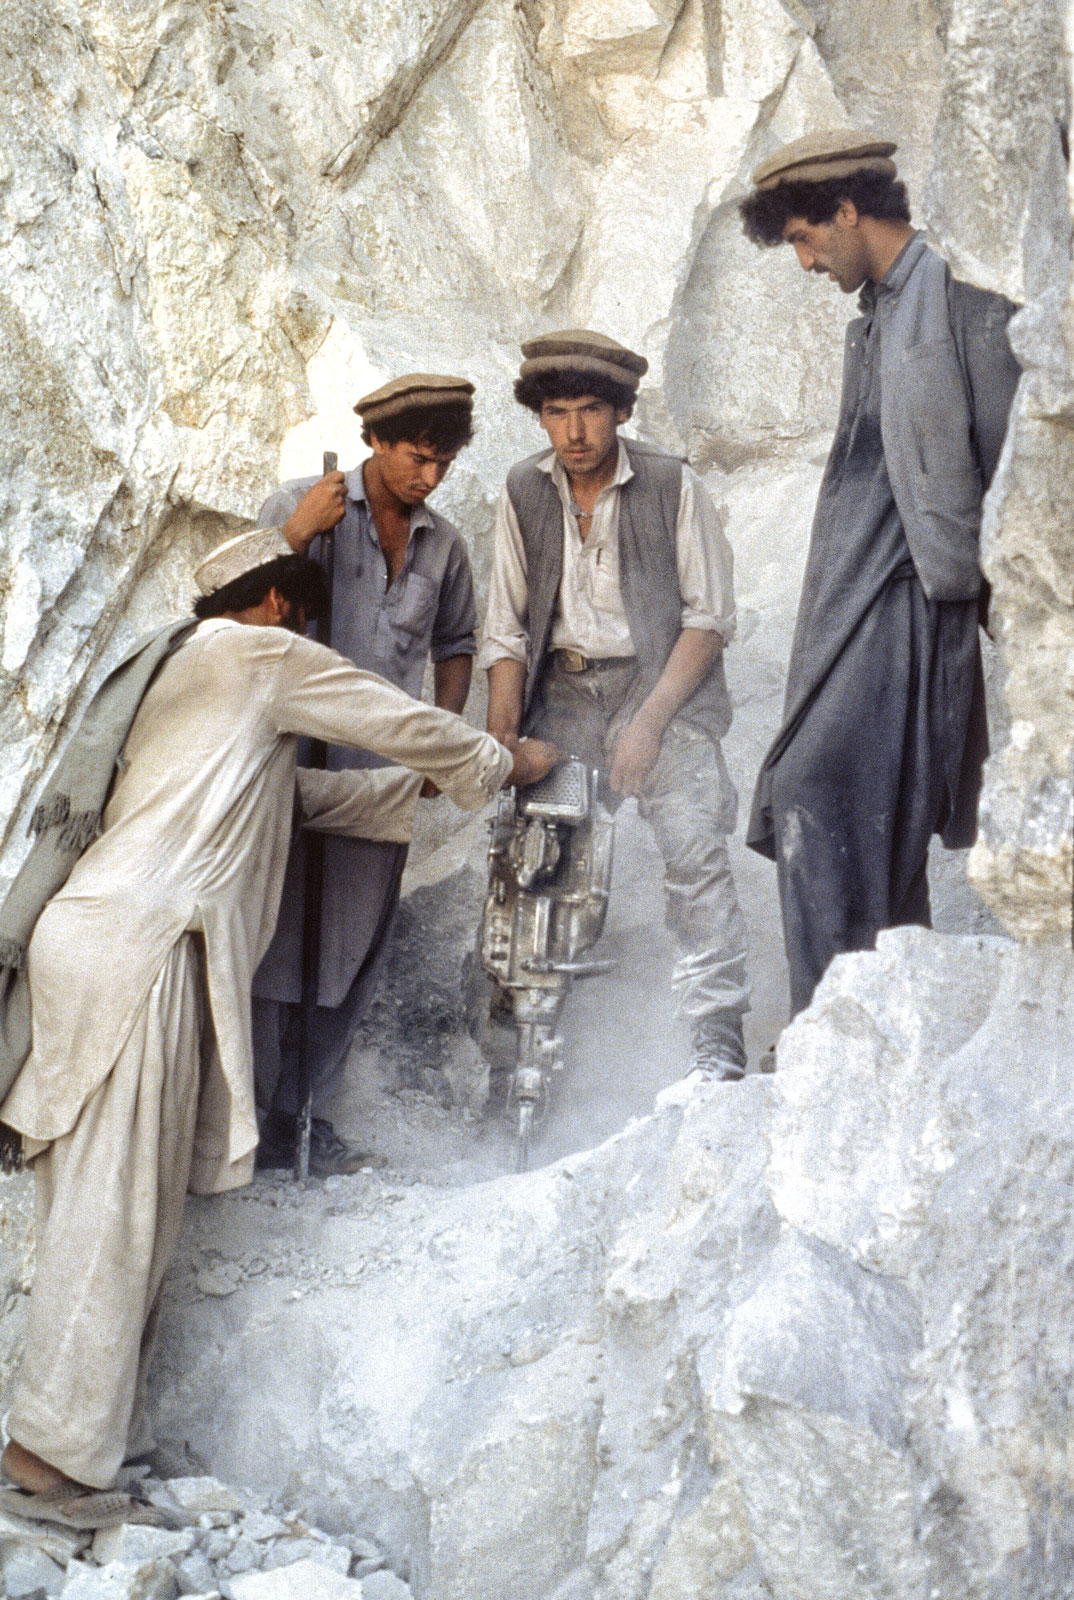 Afghan miners drilling the limestone for rubies at Jegdalek, Afghanistan. (Photo: Gary Bowersox)